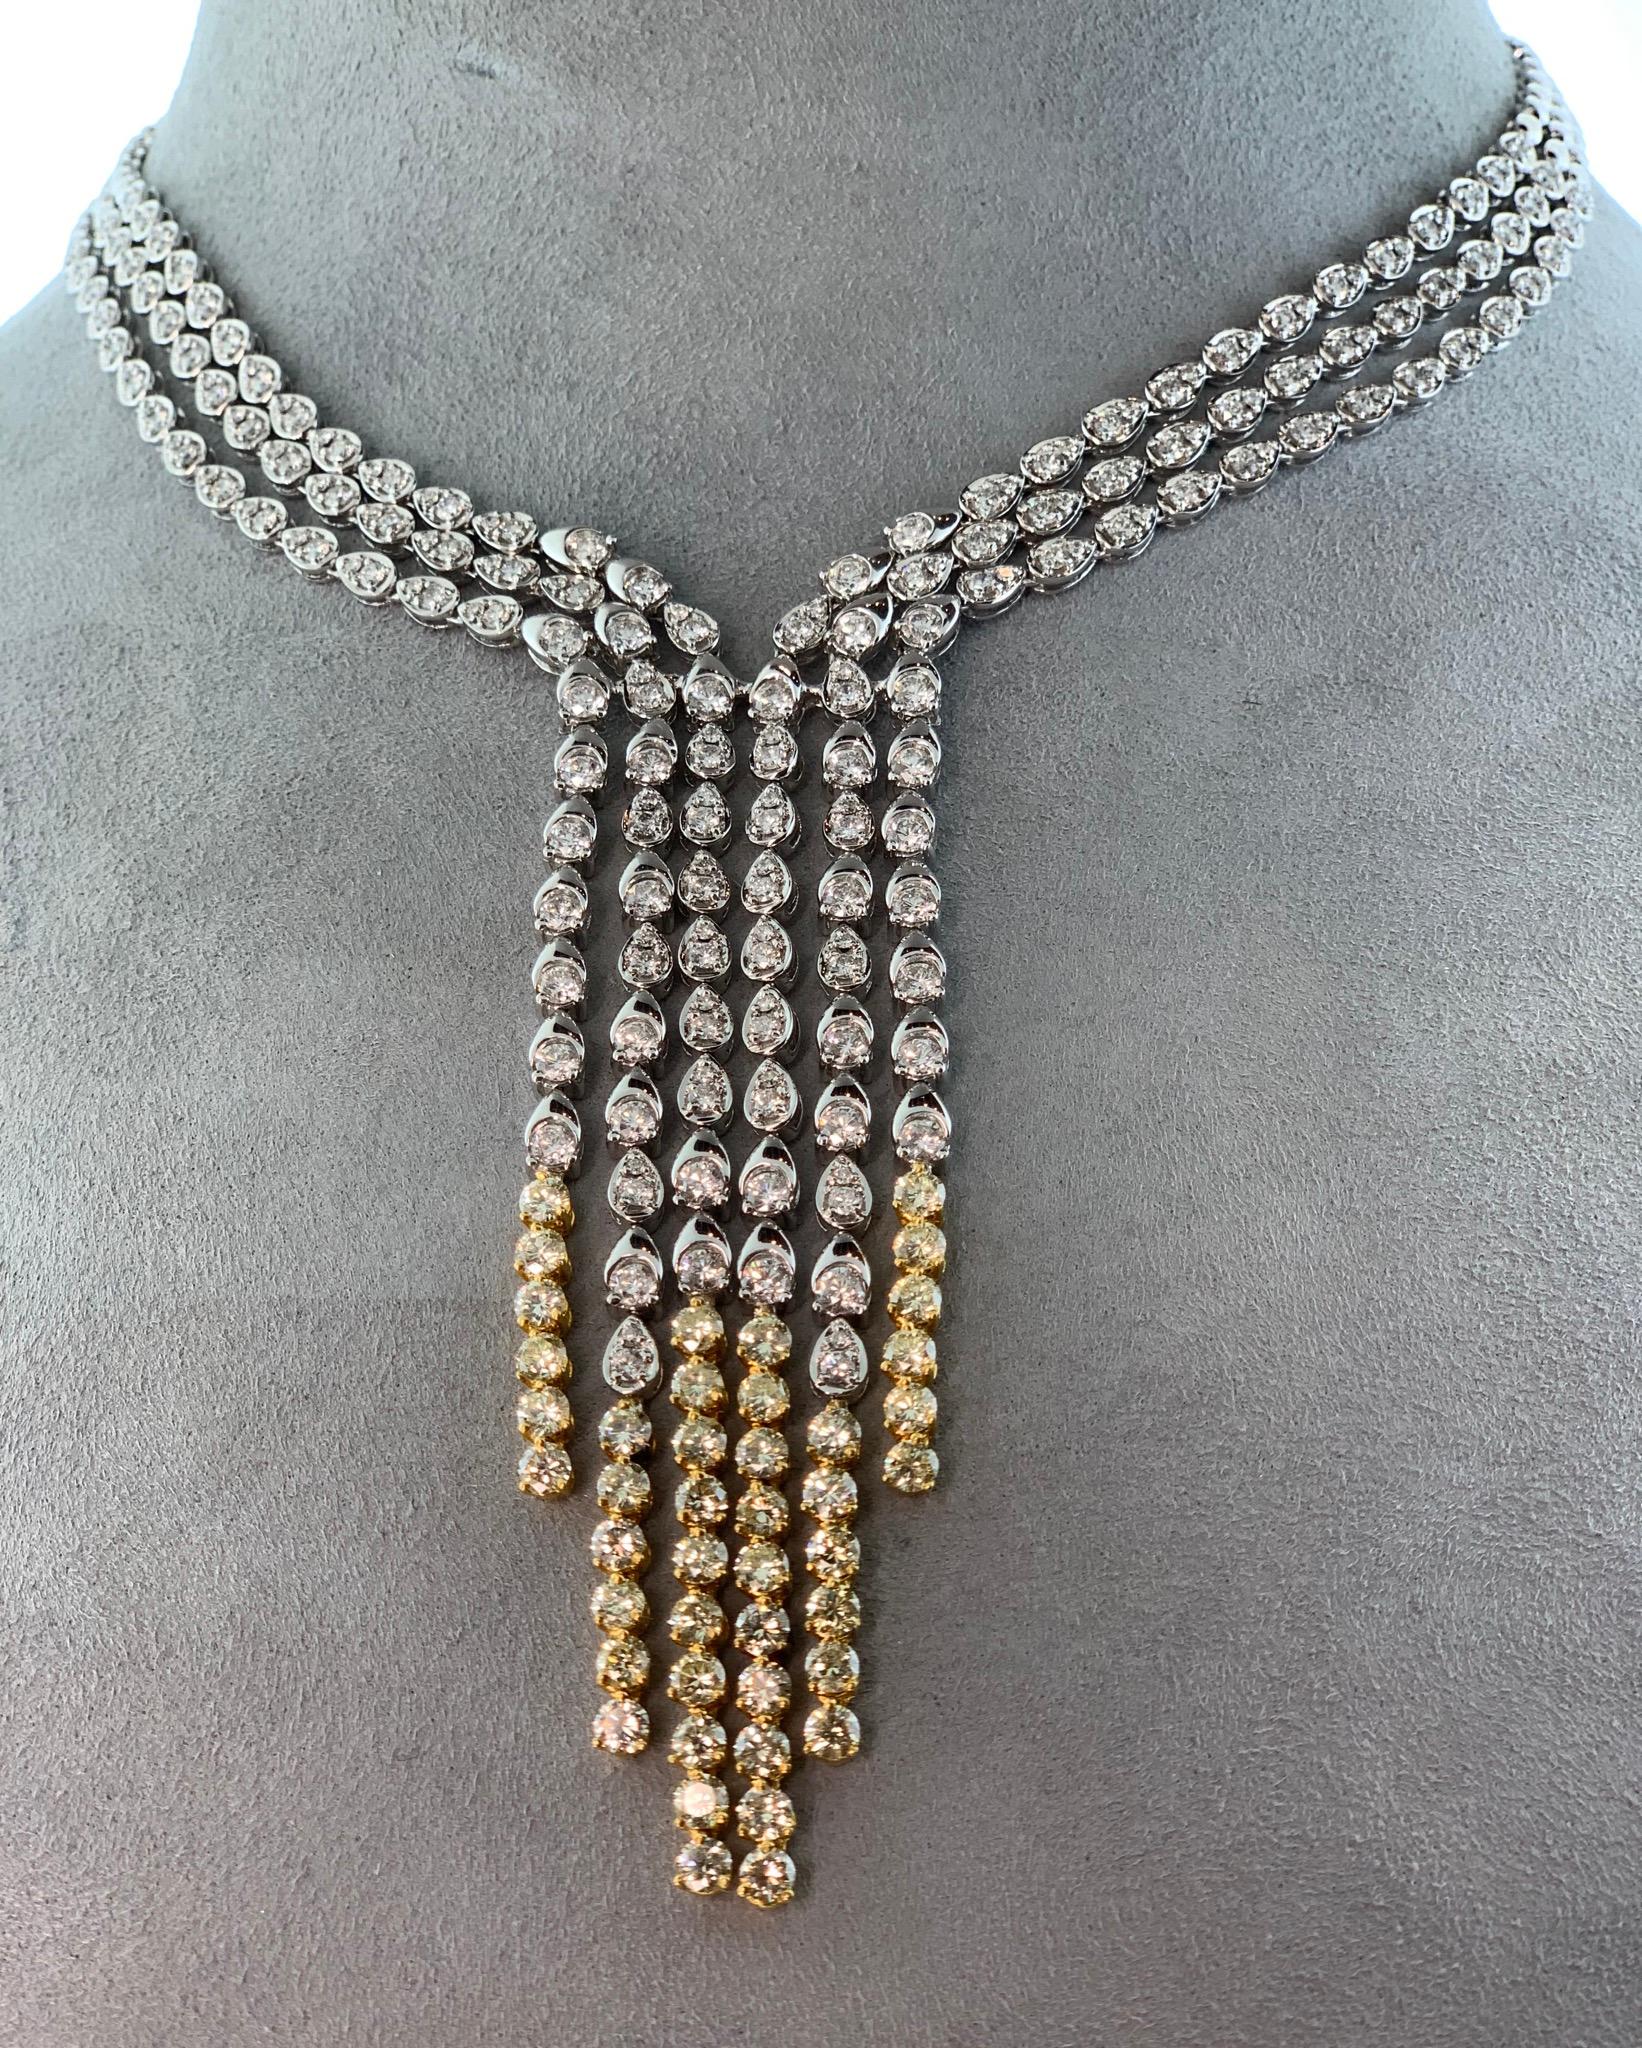 Yellow White Diamond 18k White Gold Necklace. Beautiful drop chandler necklace is 16 inches around neck and drops 4 inches. Total weight 67.33 Grams. Total carat weight approximately 15 carats 